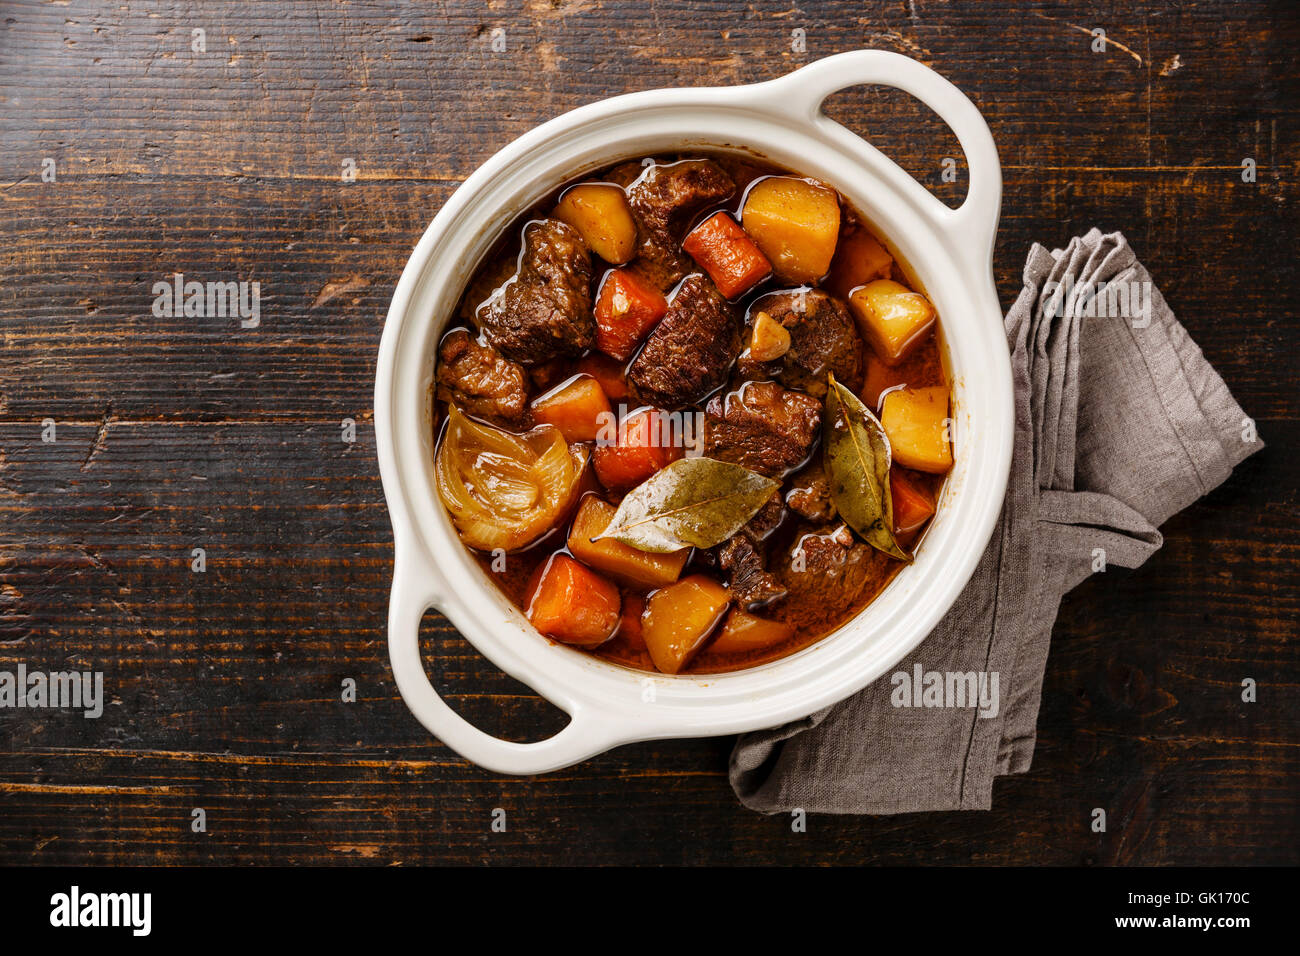 Beef meat stewed with potatoes, carrots and spices in ceramic pot on wooden background Stock Photo